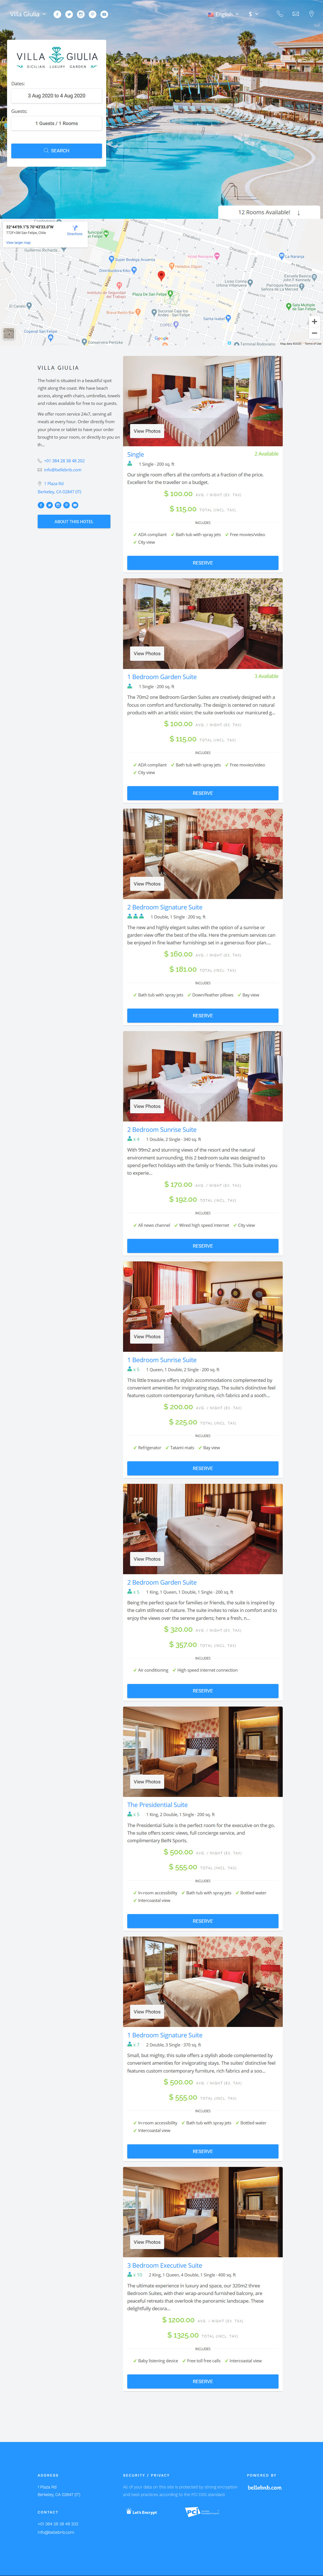 Picture Sample 1 Villa Reservations System with White Label Hotel Booking Engine with Differents Settings & Styles by Bellebnb.